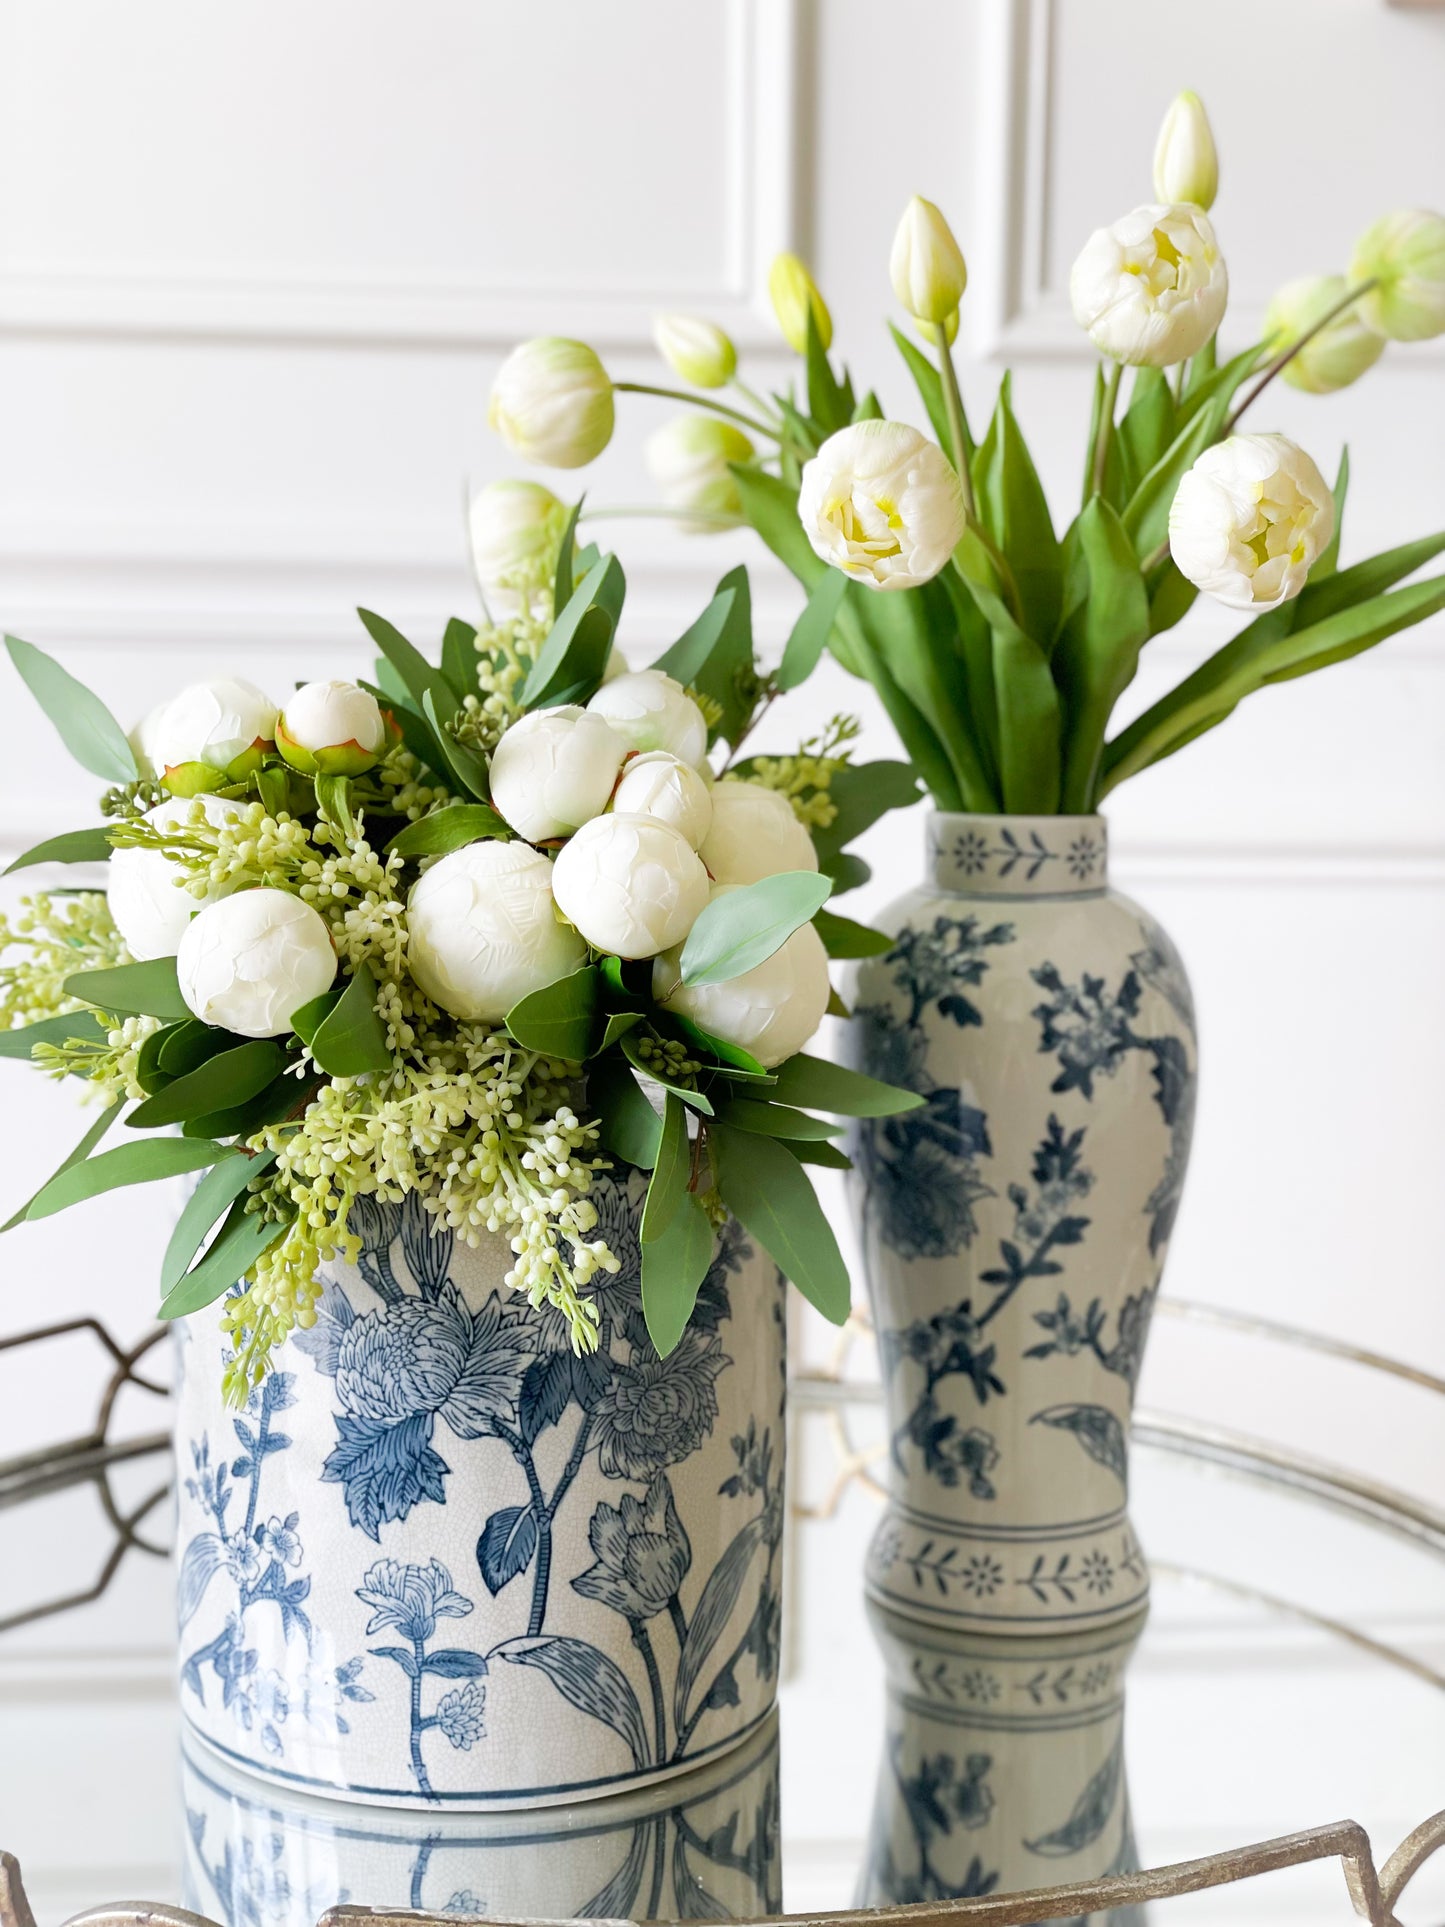 Japanese Blossom Blue And White Vase (Local Pickup Only)